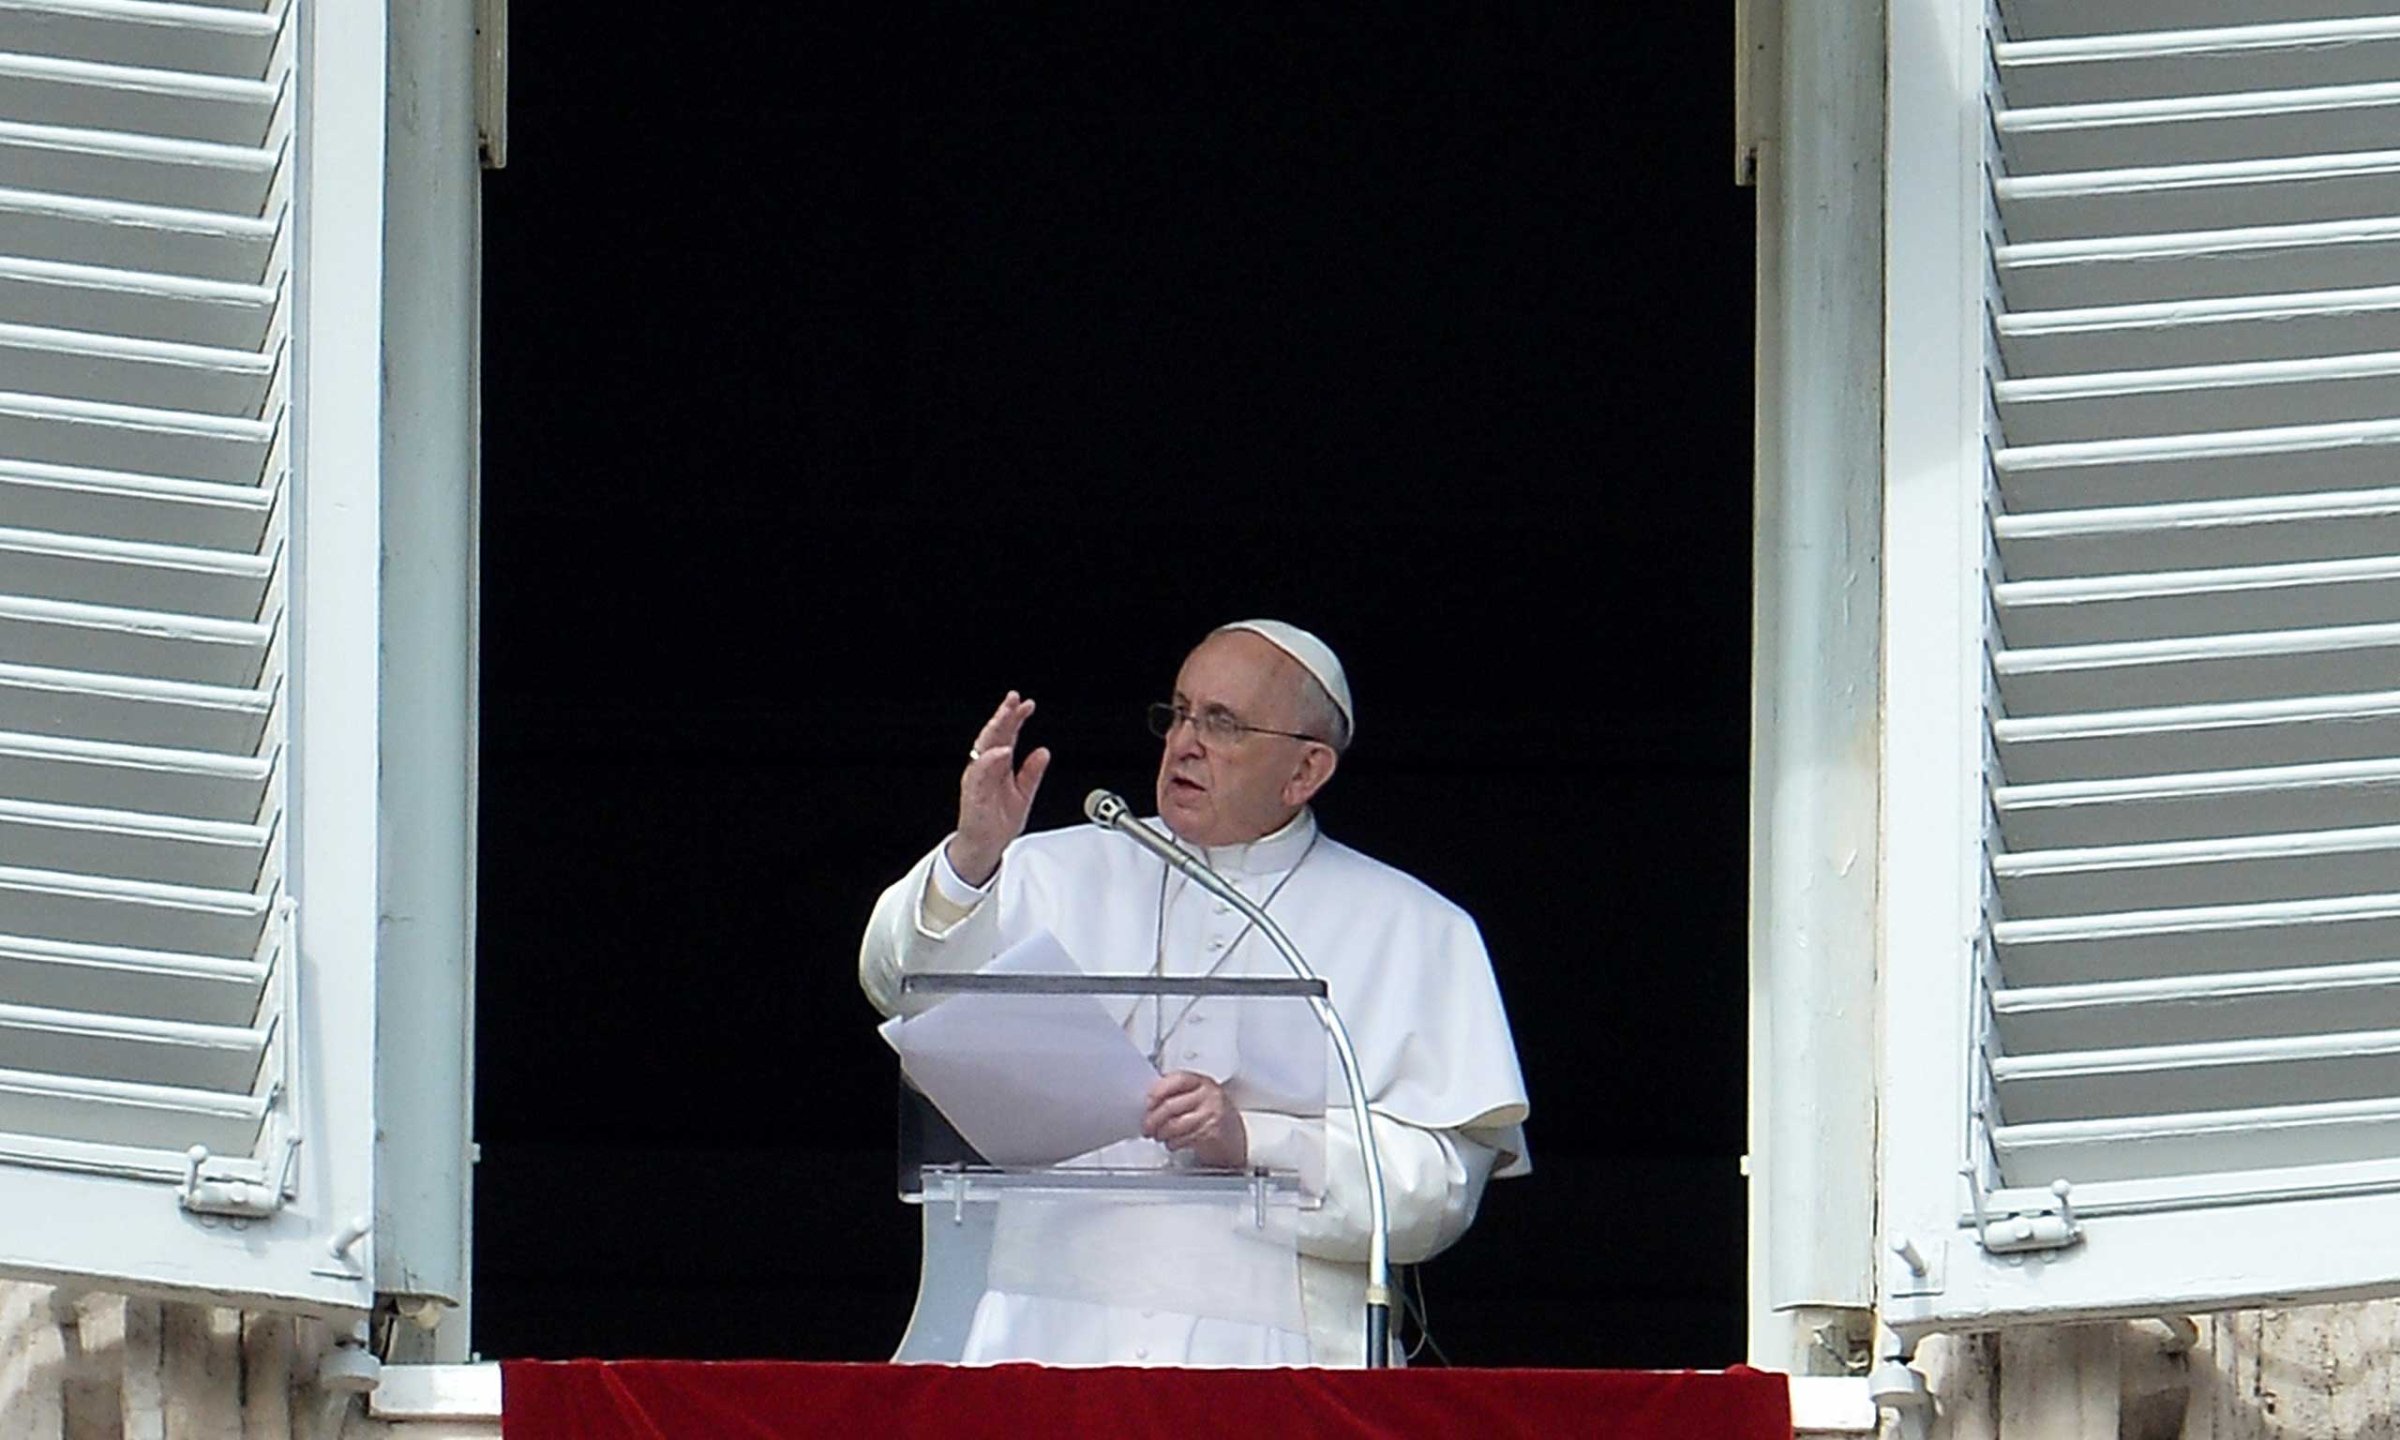 Pope Francis addresses the crowd from the window of the apostolic palace overlooking Saint Peter's square during his Angelus prayer on Feb. 22, 2015 at the Vatican.